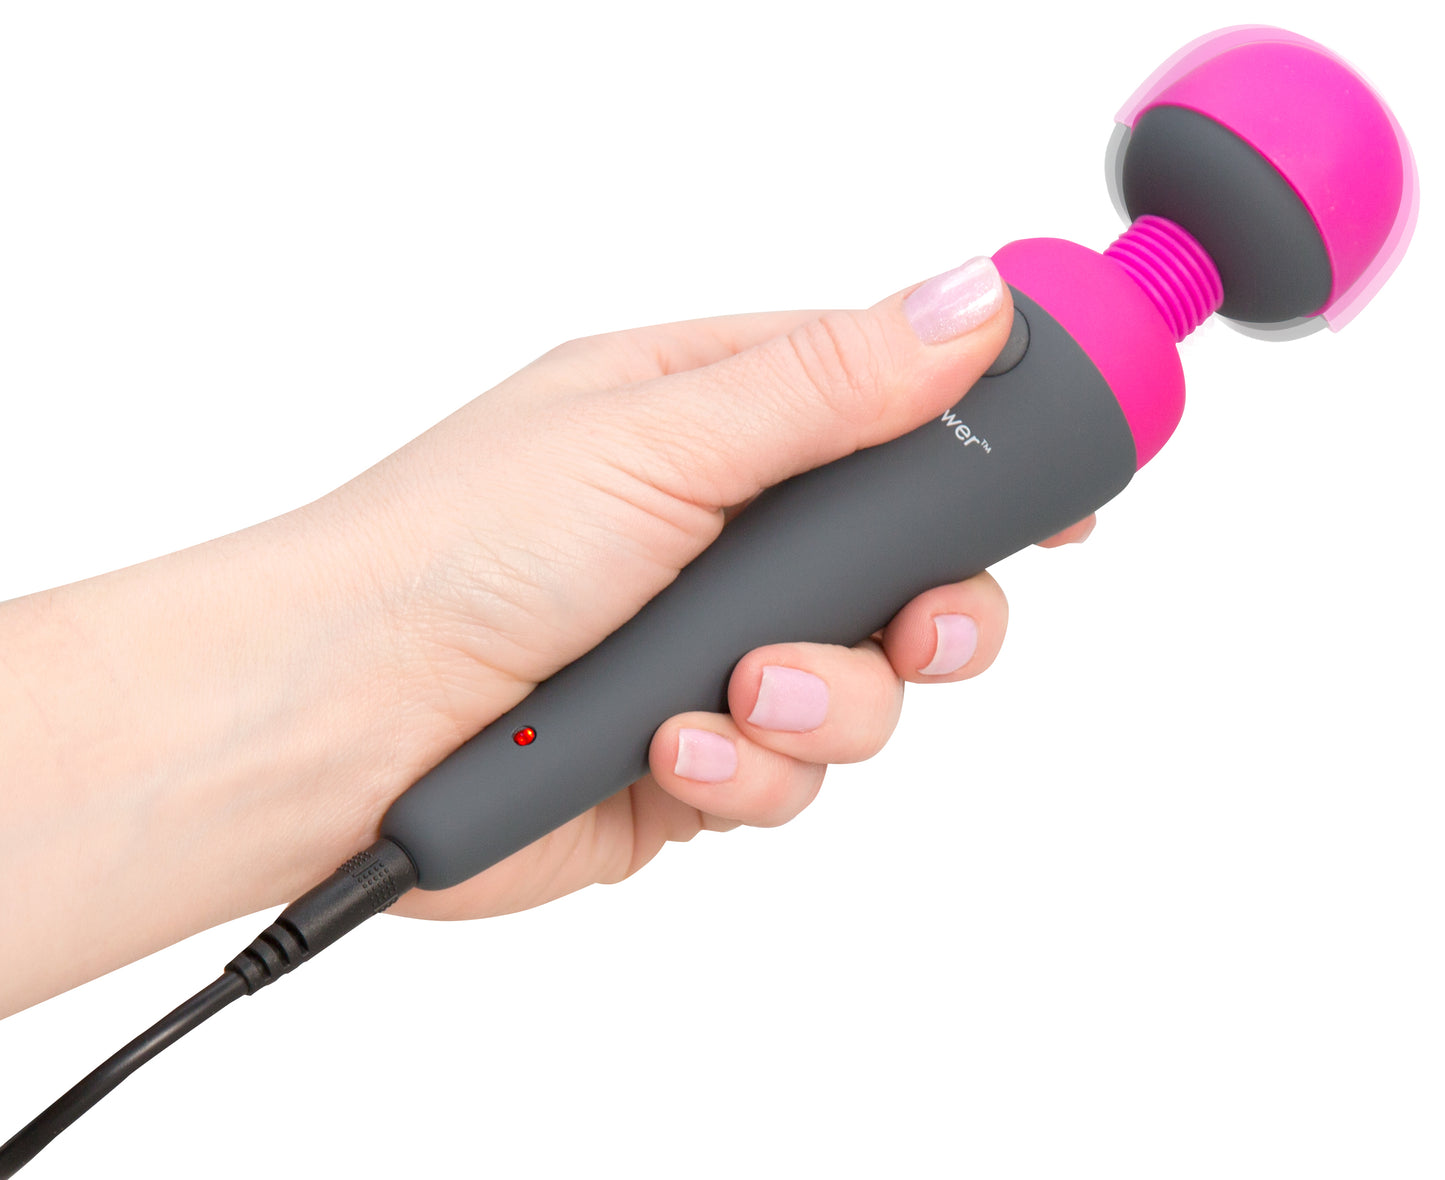 Palm Power Massager Fuschia - Just for you desires